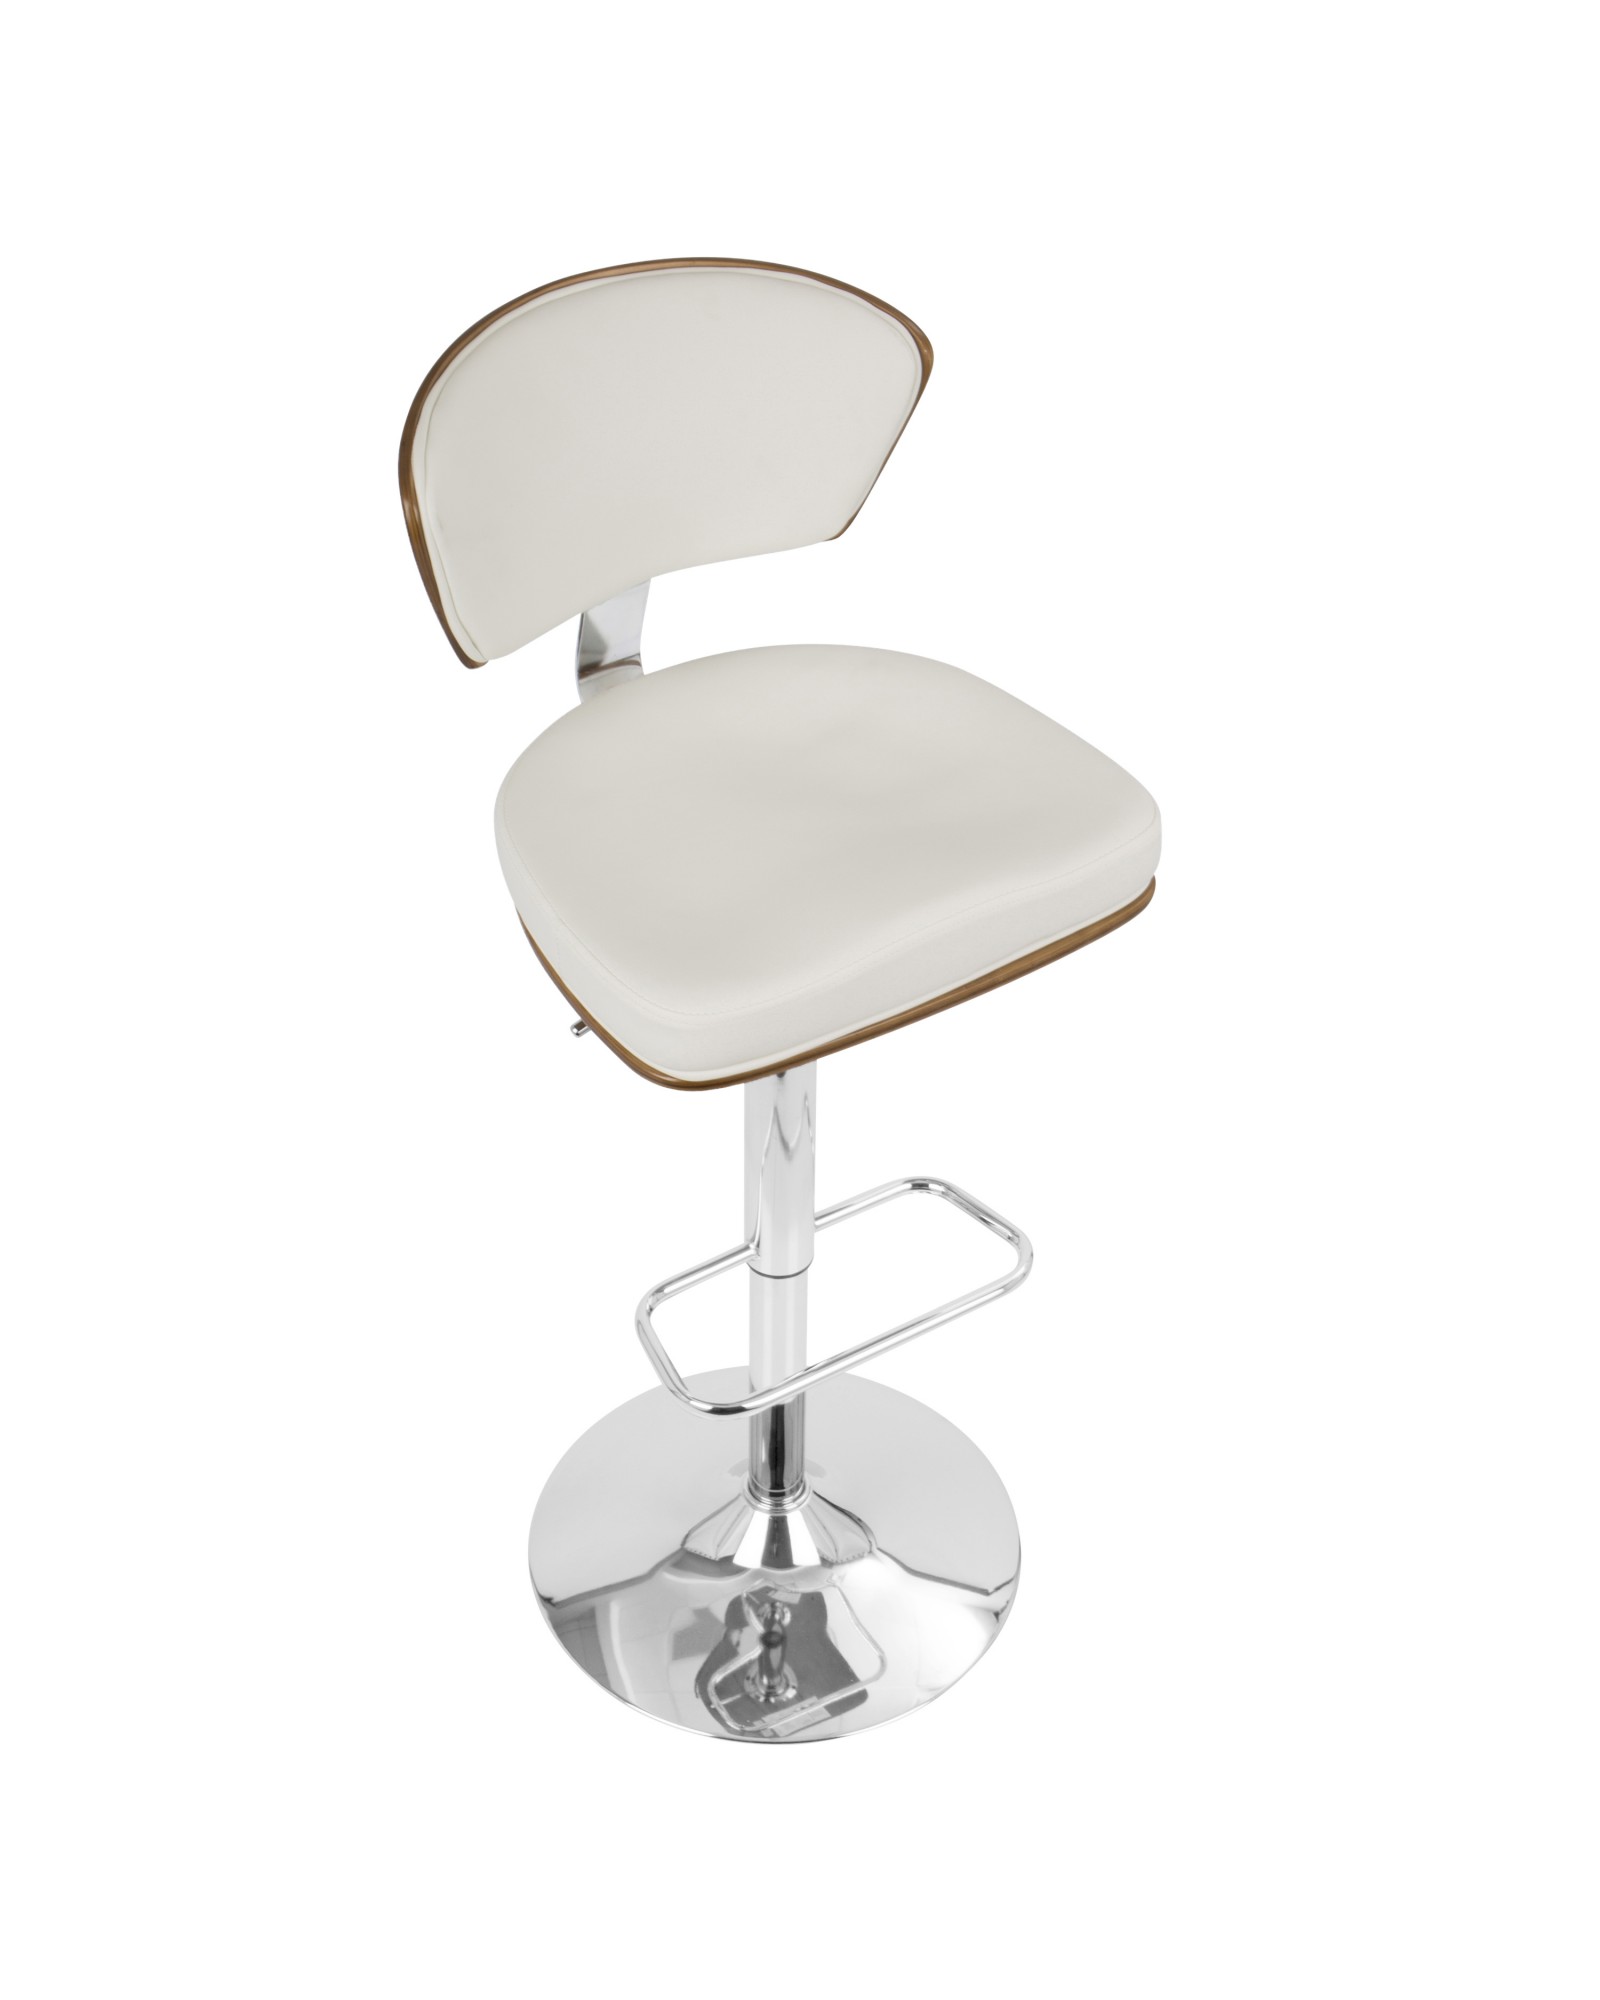 Ravinia Mid-Century Modern Adjustable Barstool with Swivel in Walnut and White Faux Leather